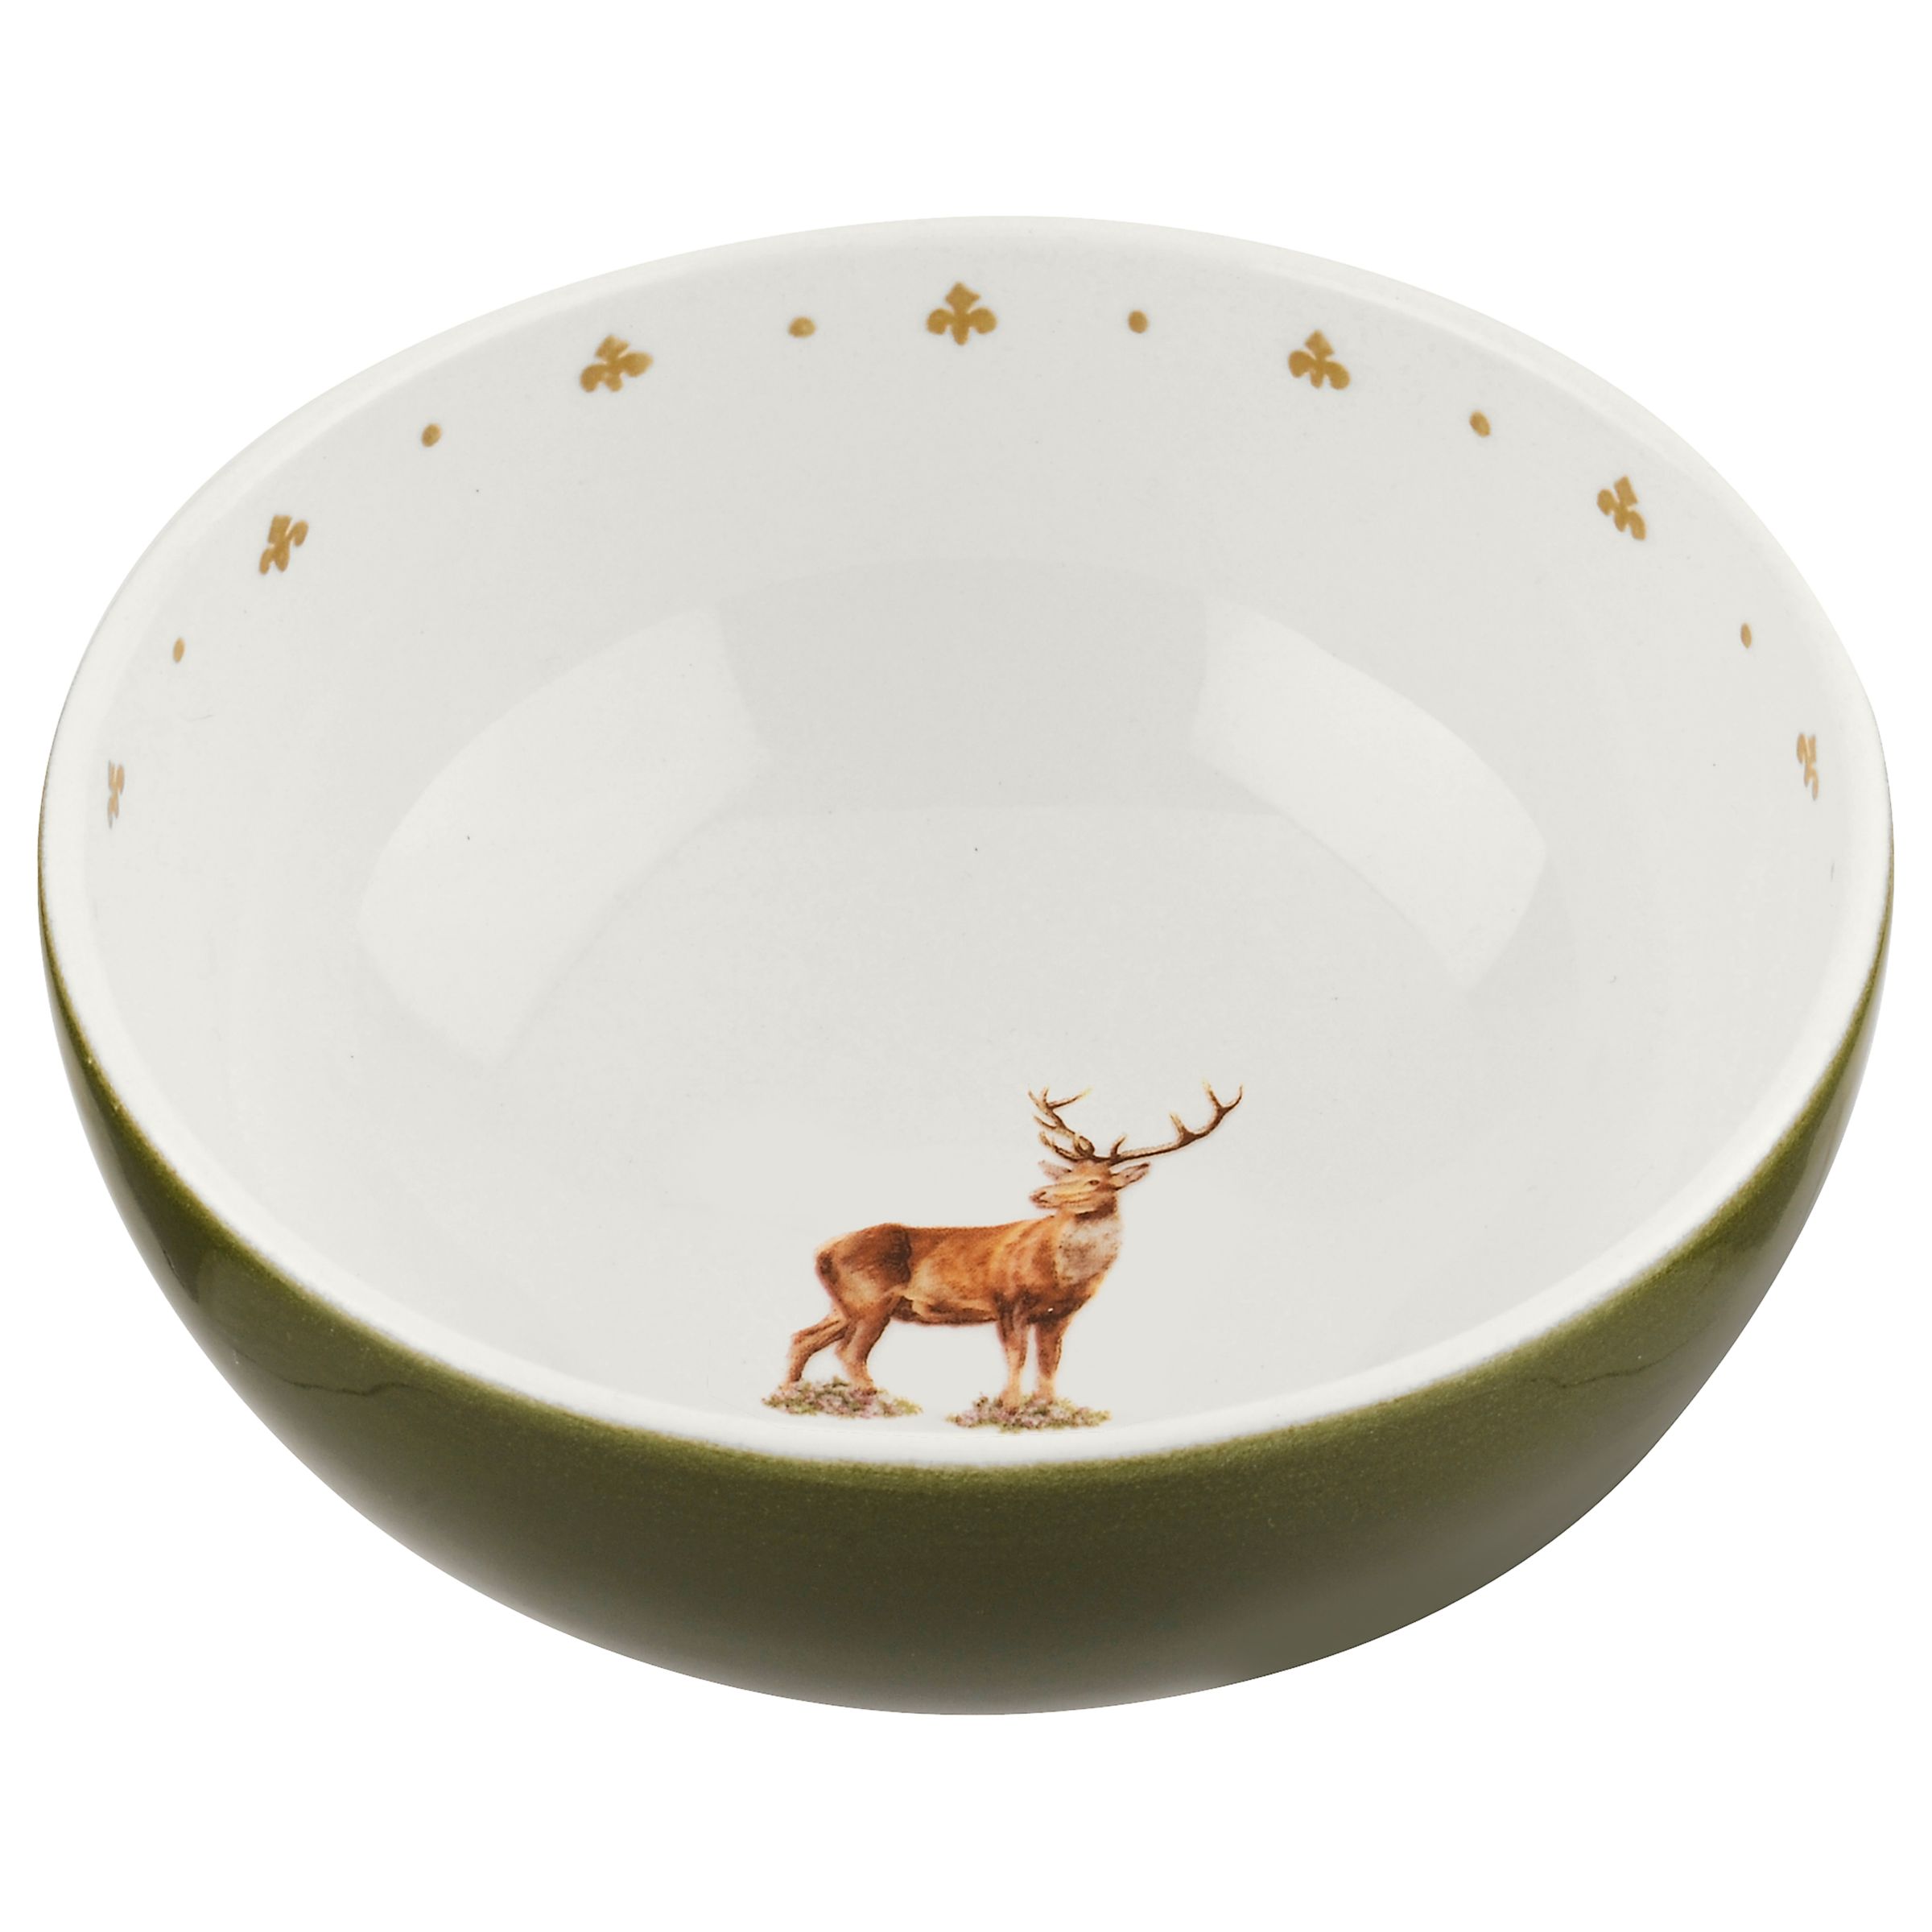 Spode Glen Lodge Stag Small Bowl Review